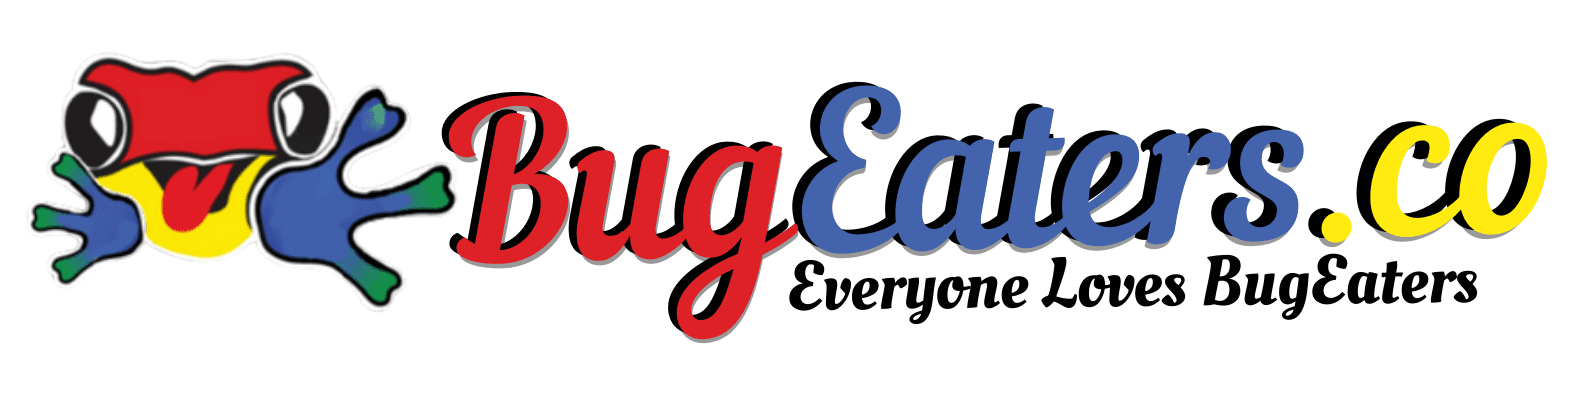 BugEaters.co